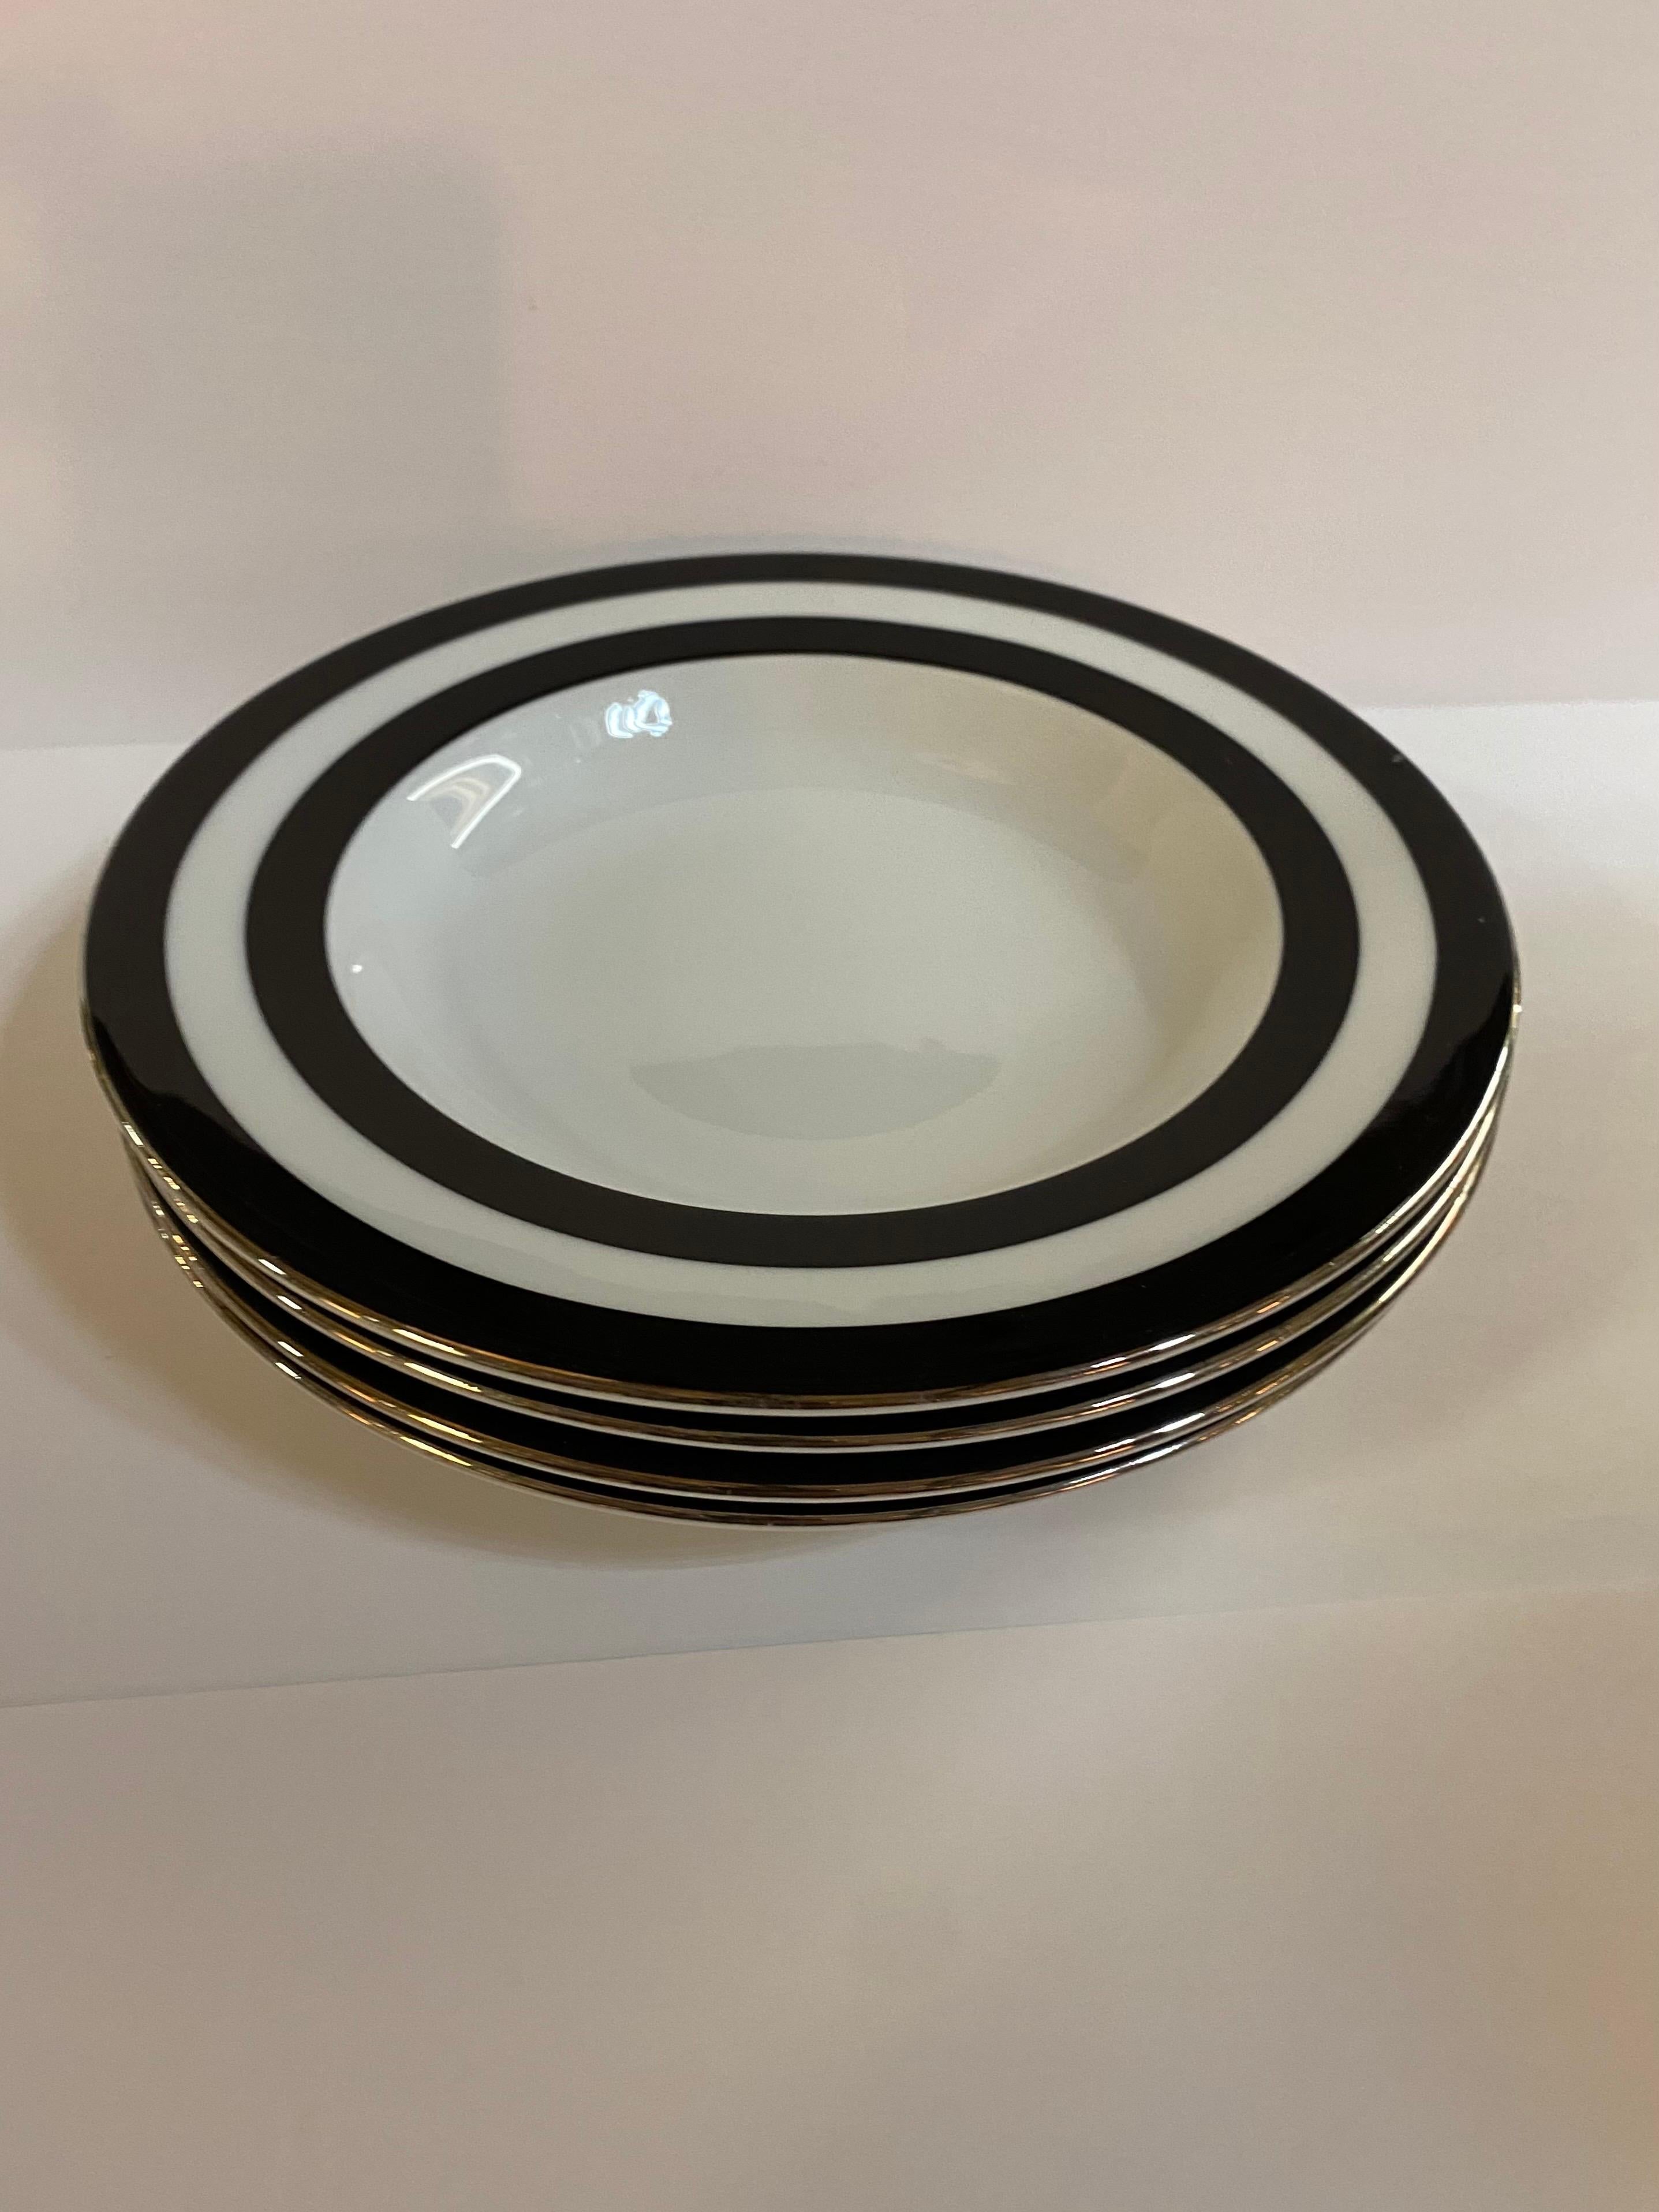 A set of 4 (four) rim soup / pasta bowls in the Spectator black pattern by Ralph Lauren Home. Porcelain. 

Signed. Made in Portugal, circa 1995-1996.

White with black wide stripe border and silver trim.

Includes 4 (four)